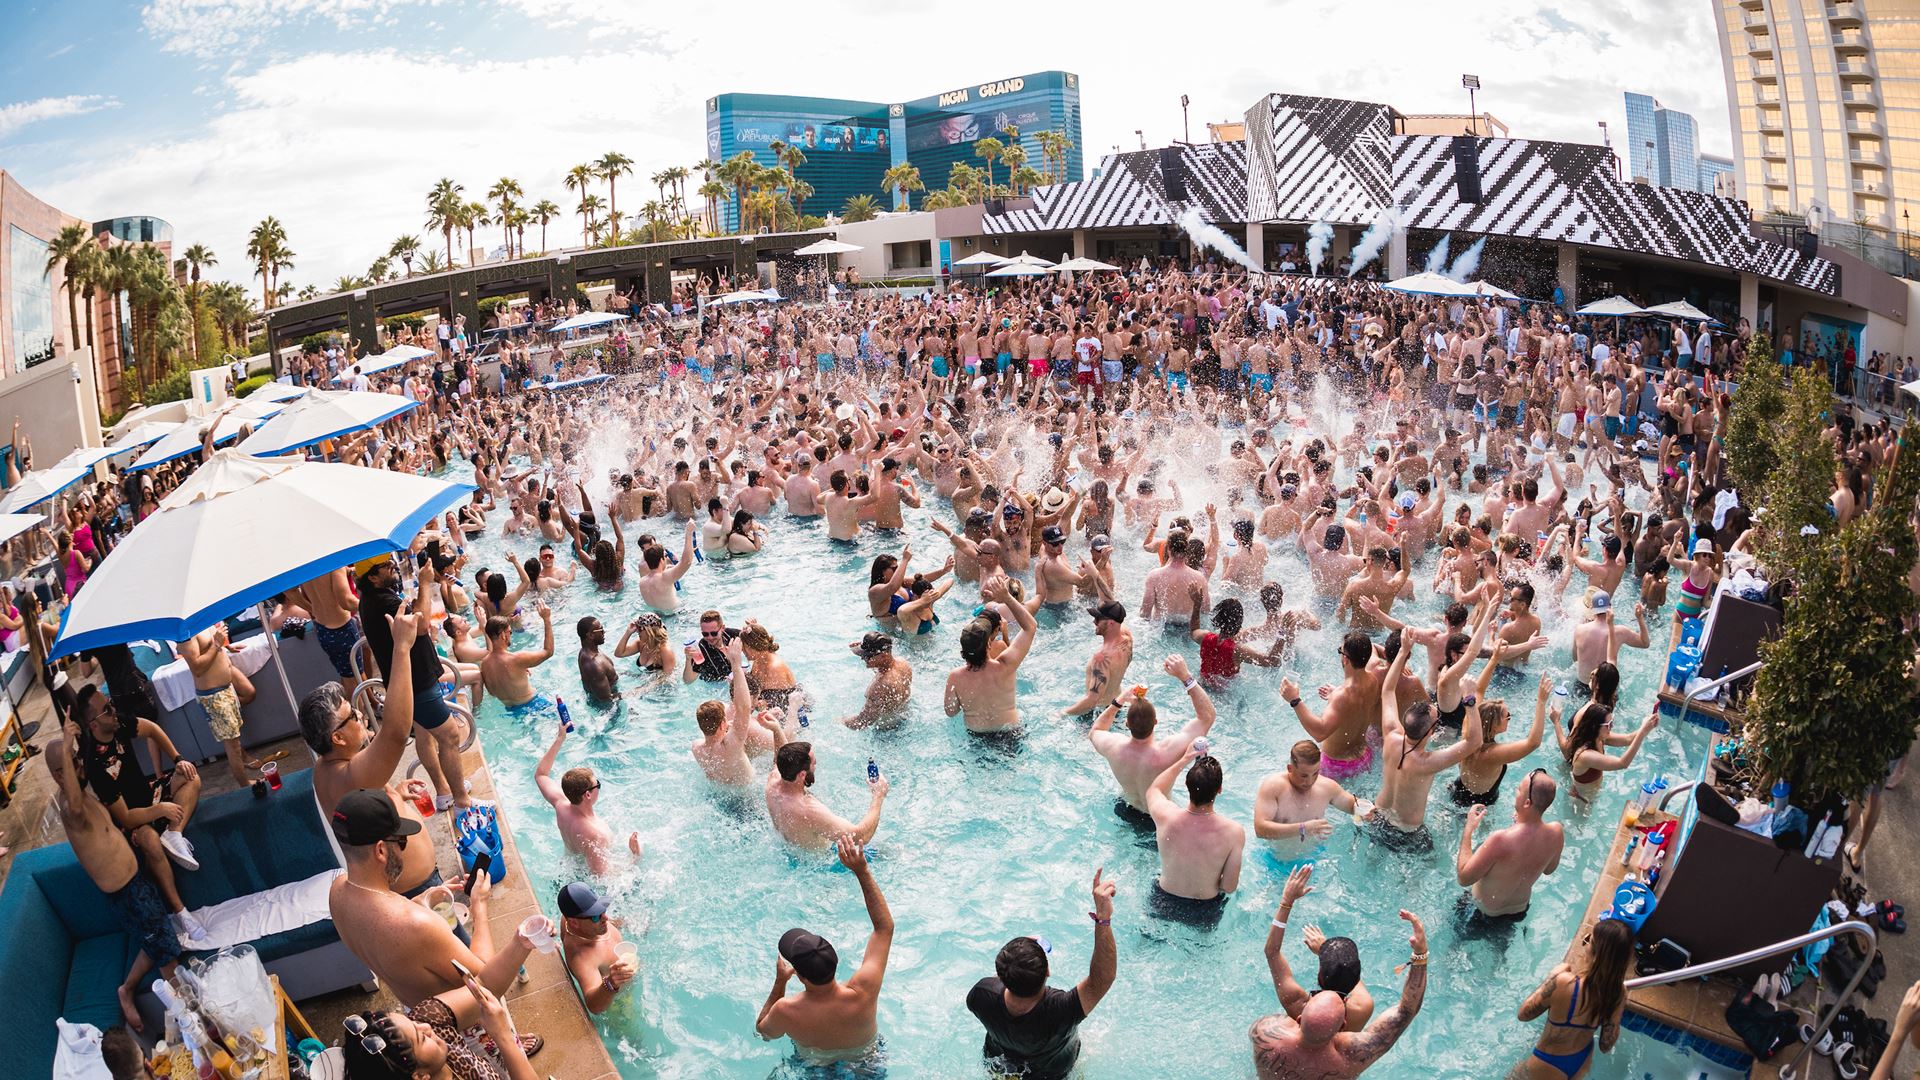 Las Vegas Is Set to Make a Splash with Another Spectacular Pool Season